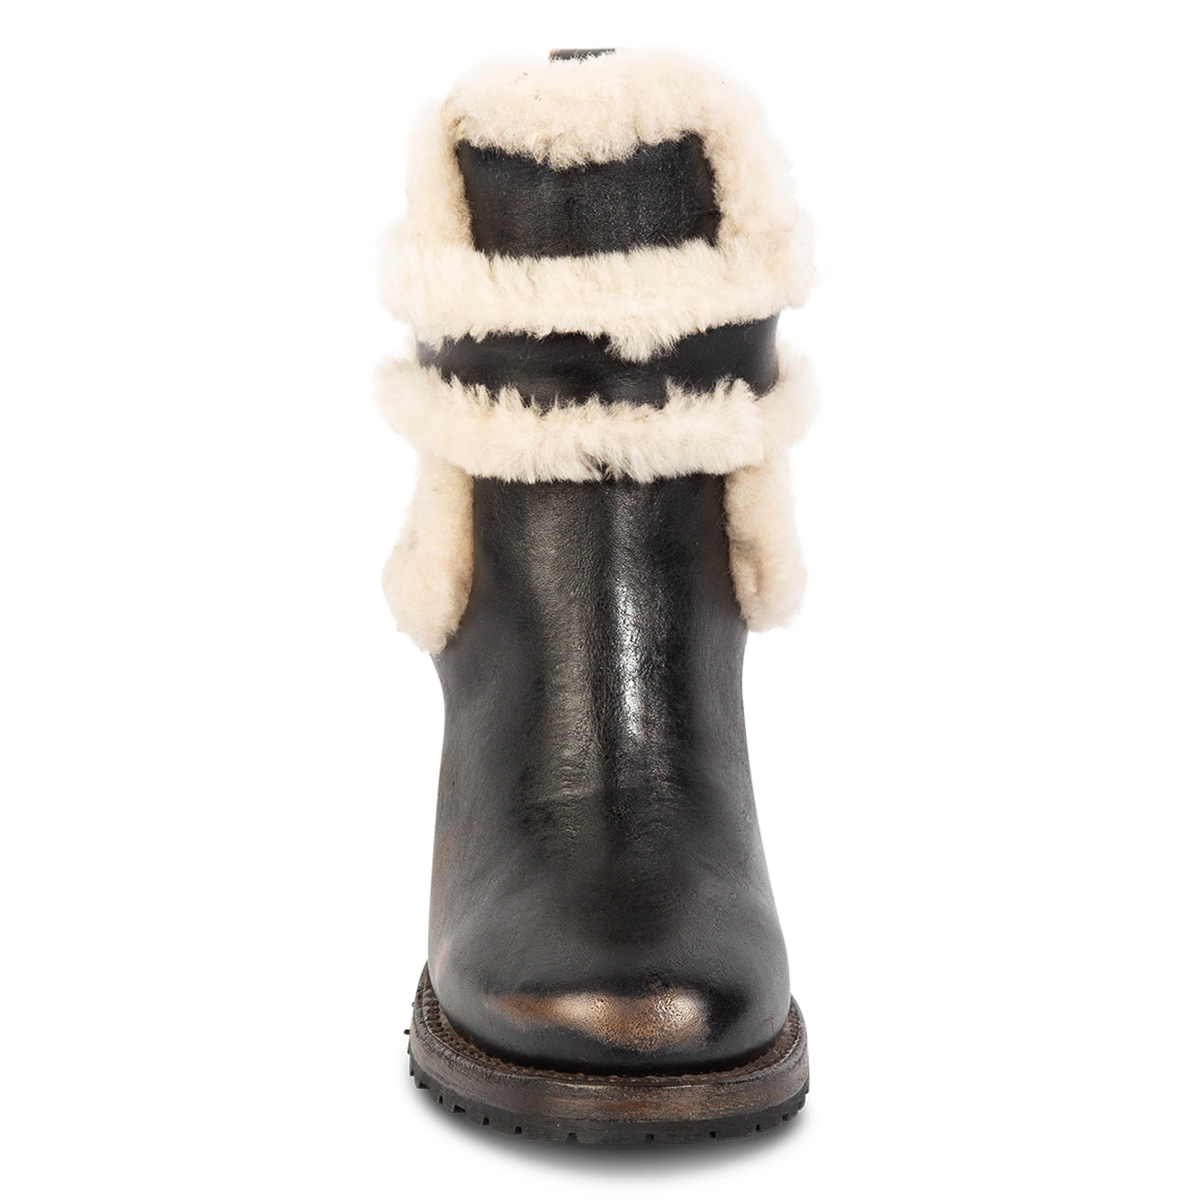 Front view showing FREEBIRD women's Neverland black leather bootie with genuine shearling removable lining, gore detailing and a stacked heel